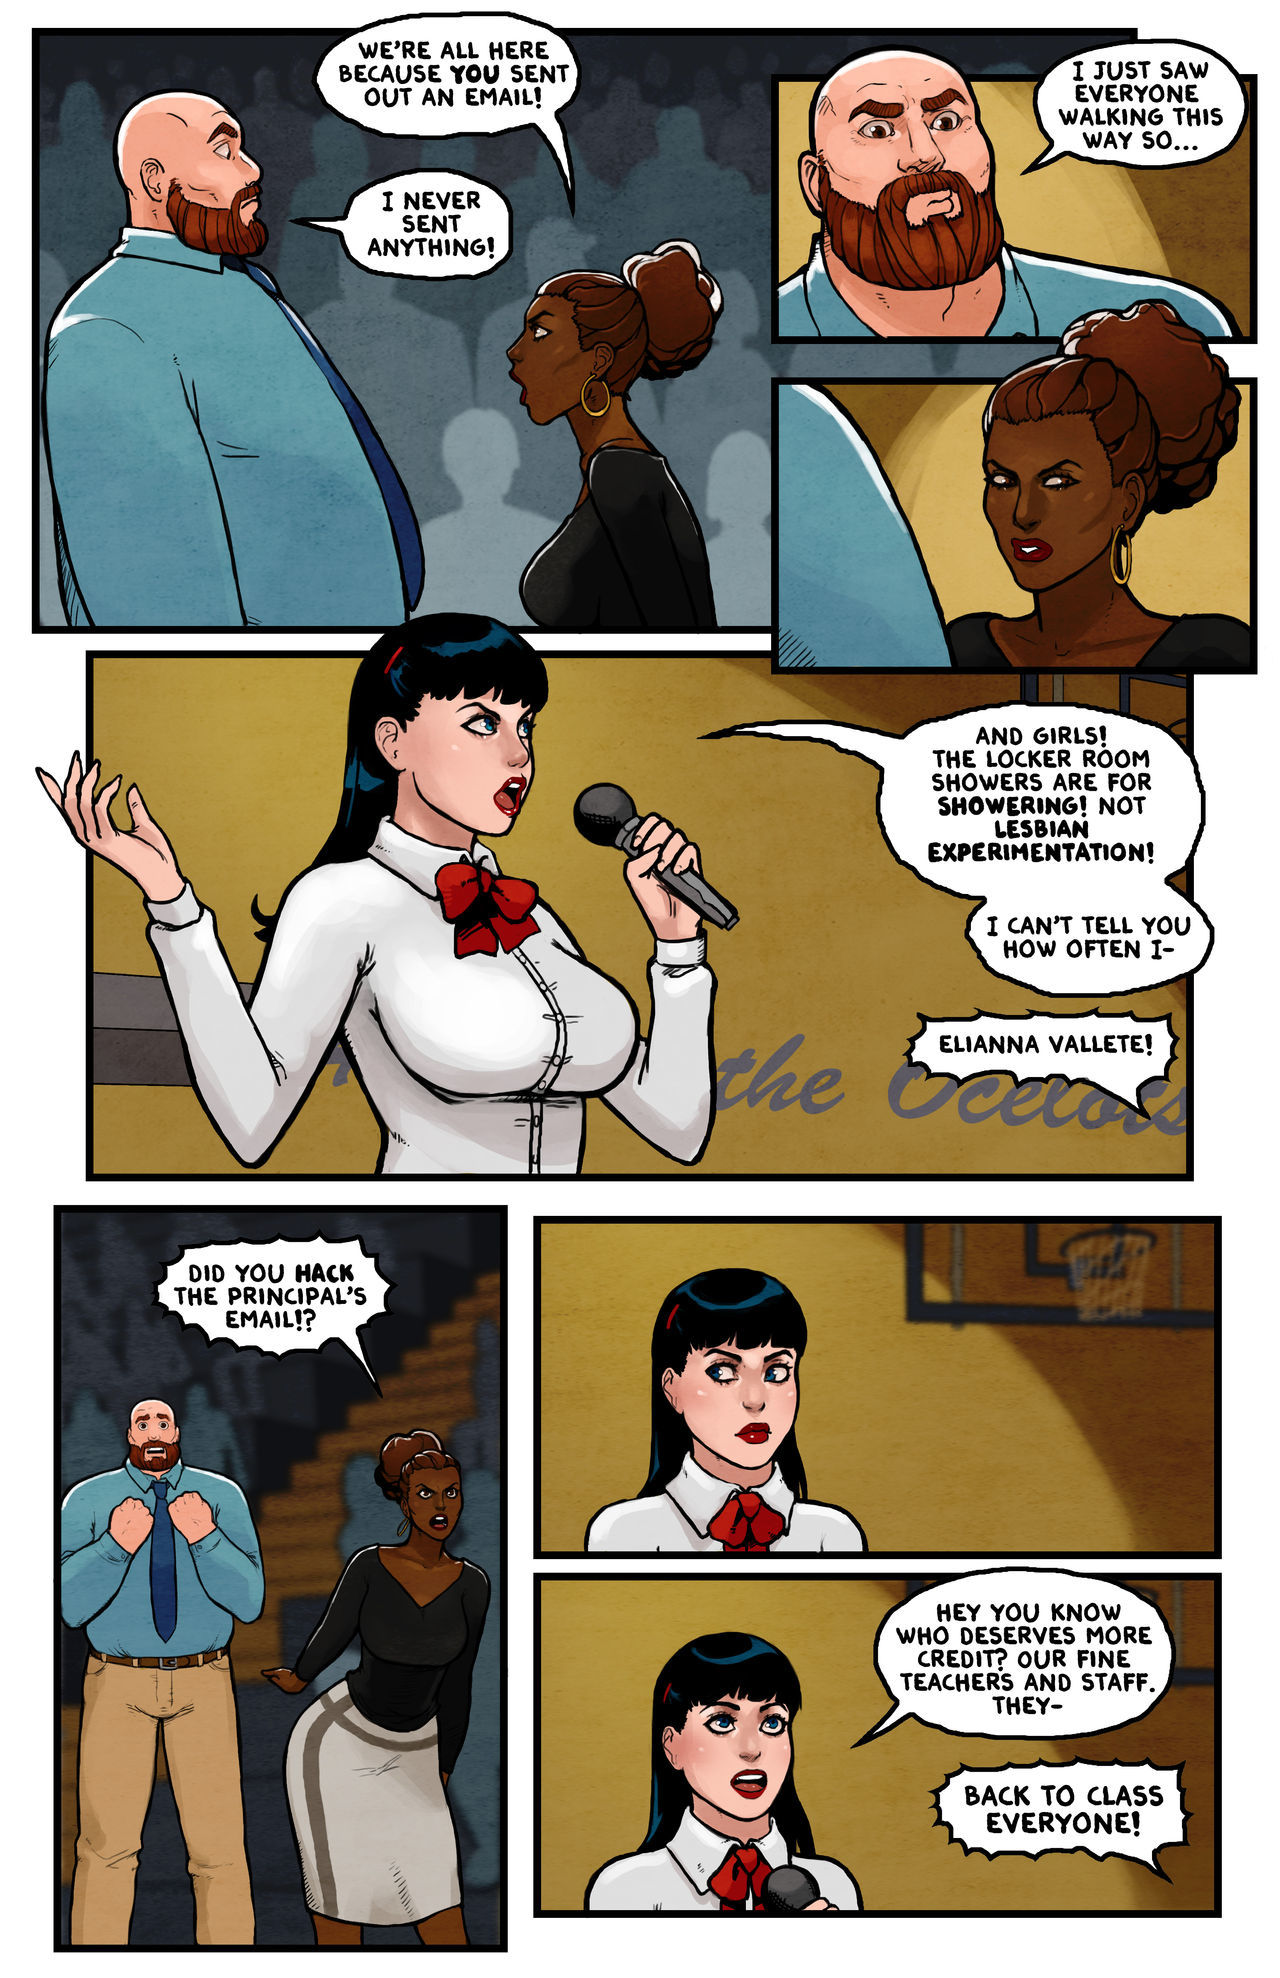 This Romantic World - Reinbach page 3